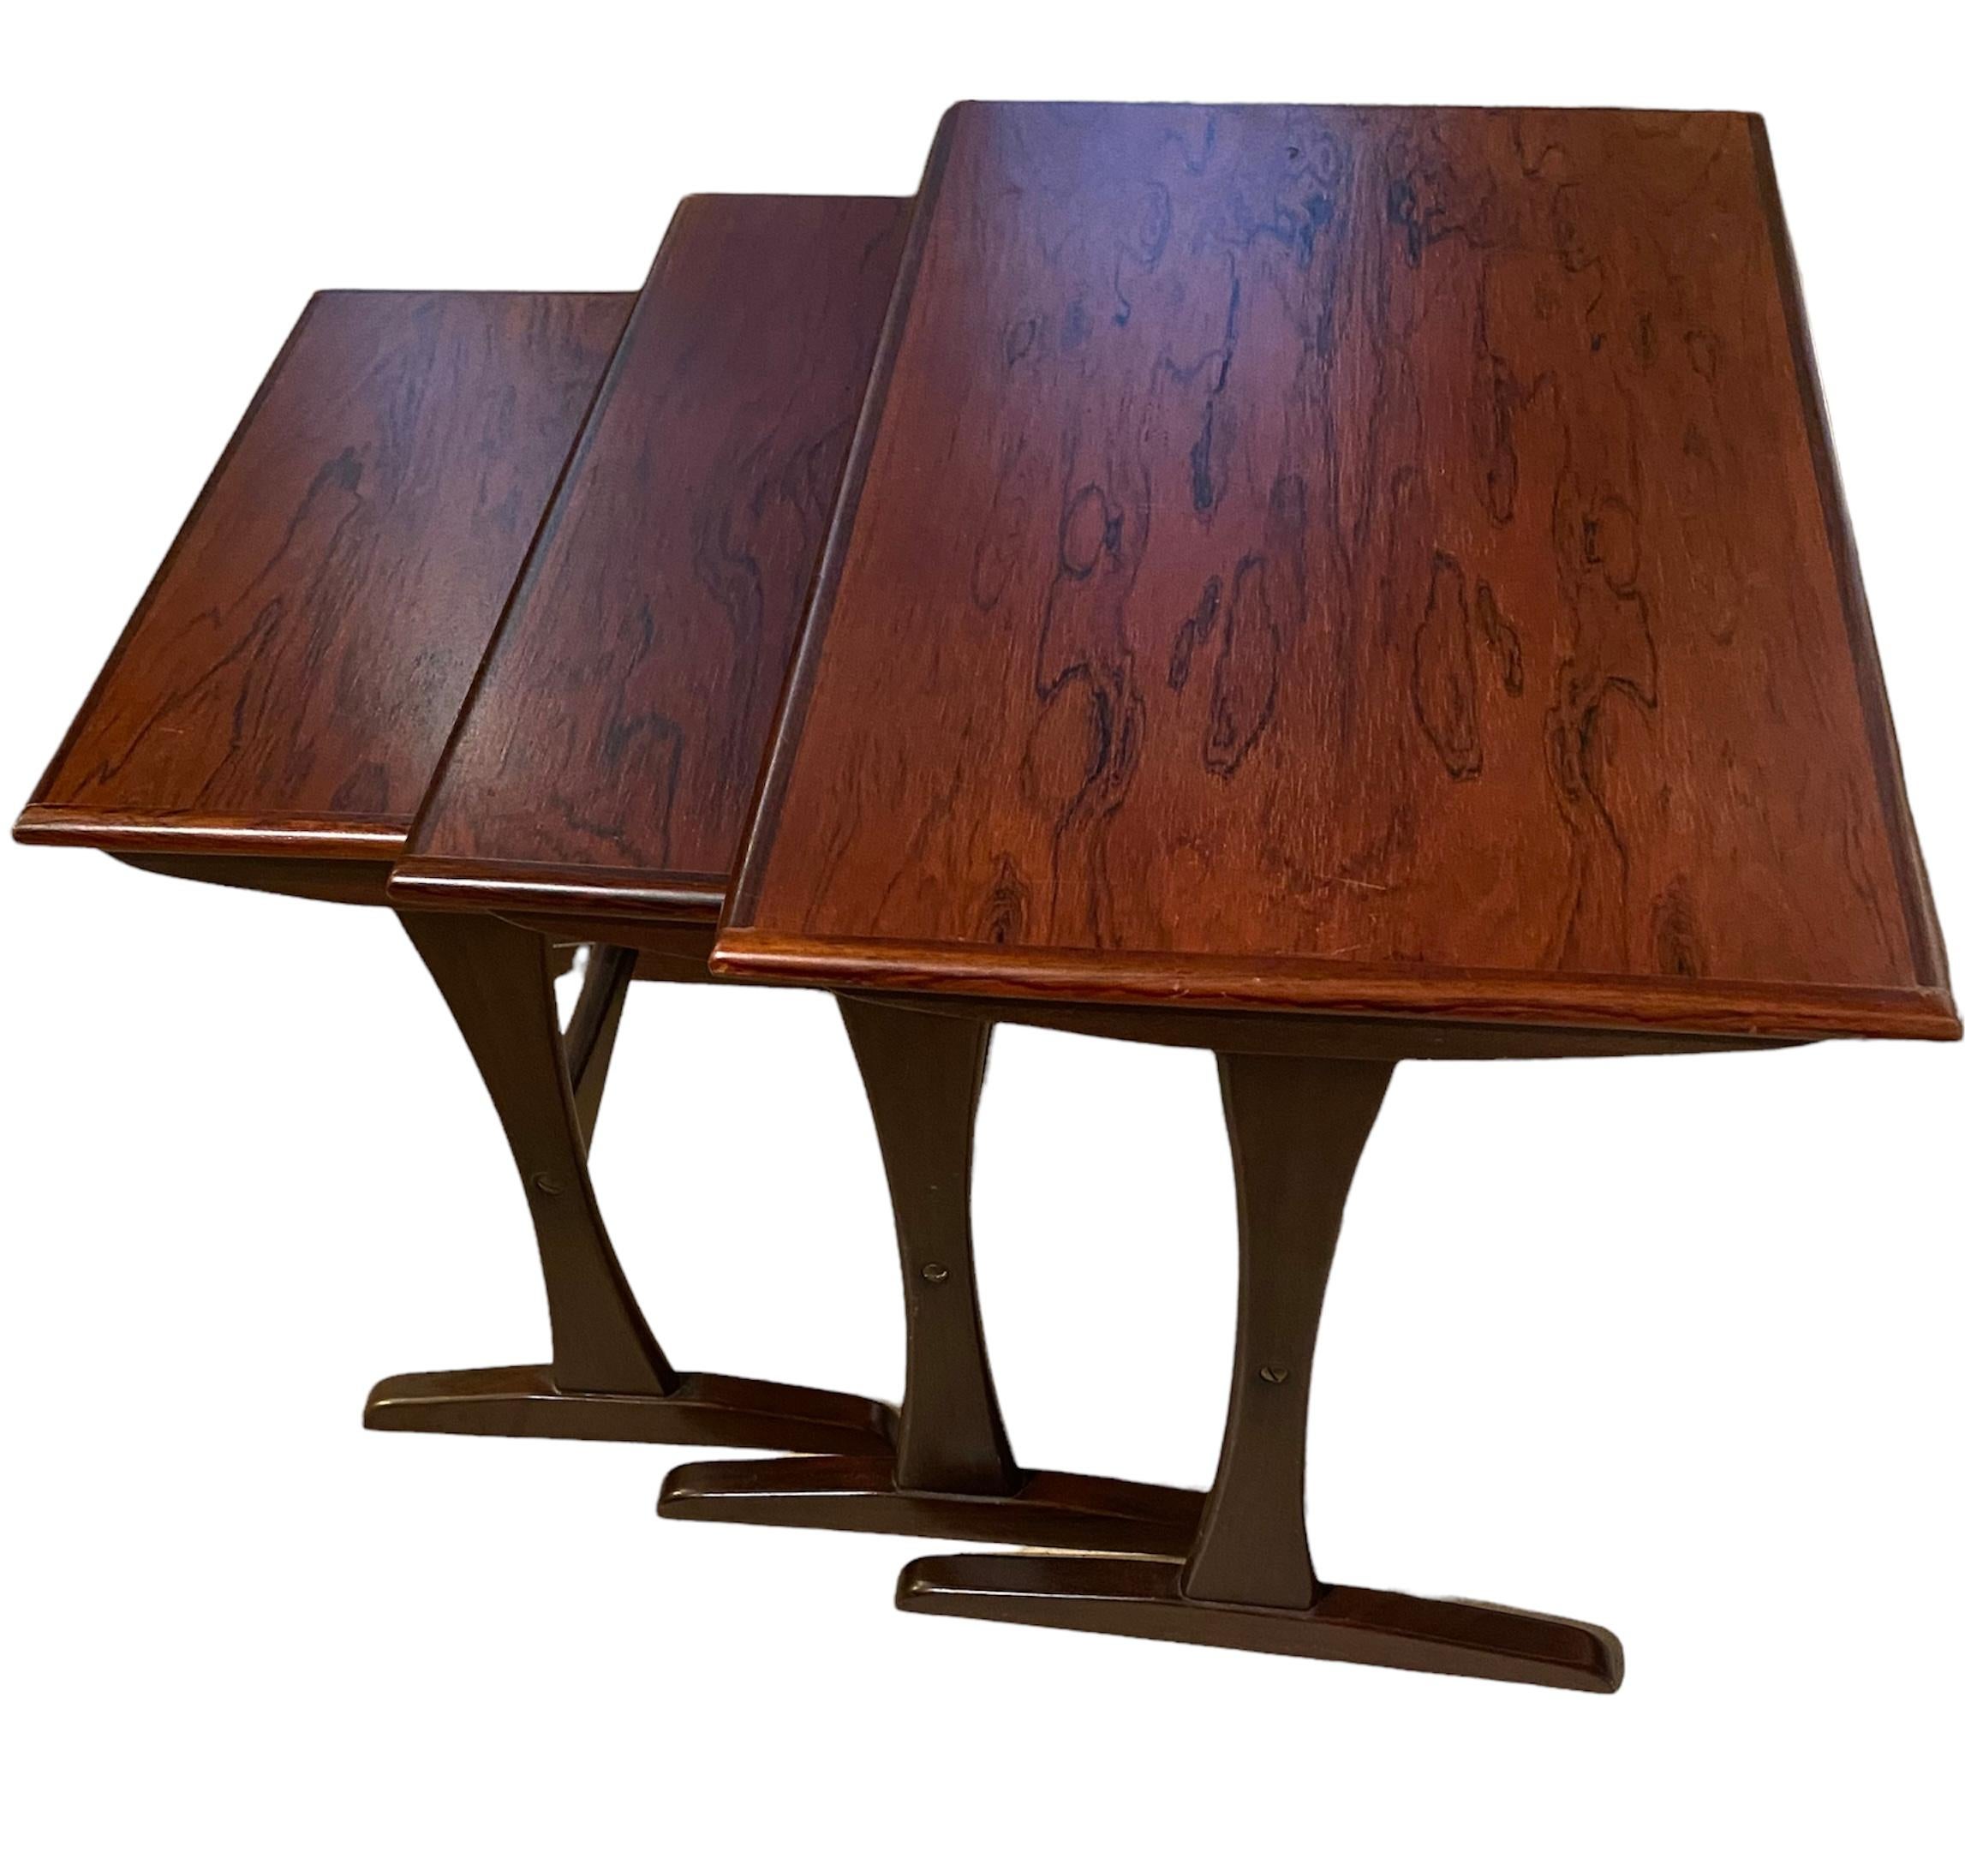 Vintage elegant set of 3 nesting tables in rosewood designed by Kai Kristiansen from 1960
( 1 ) L 57,5 x P 37,5 x H 45,5 
( 2 ) L 48 x P 34,5 x H 43,5 
( 3 ) L 38,5 x P 31 x H 41.